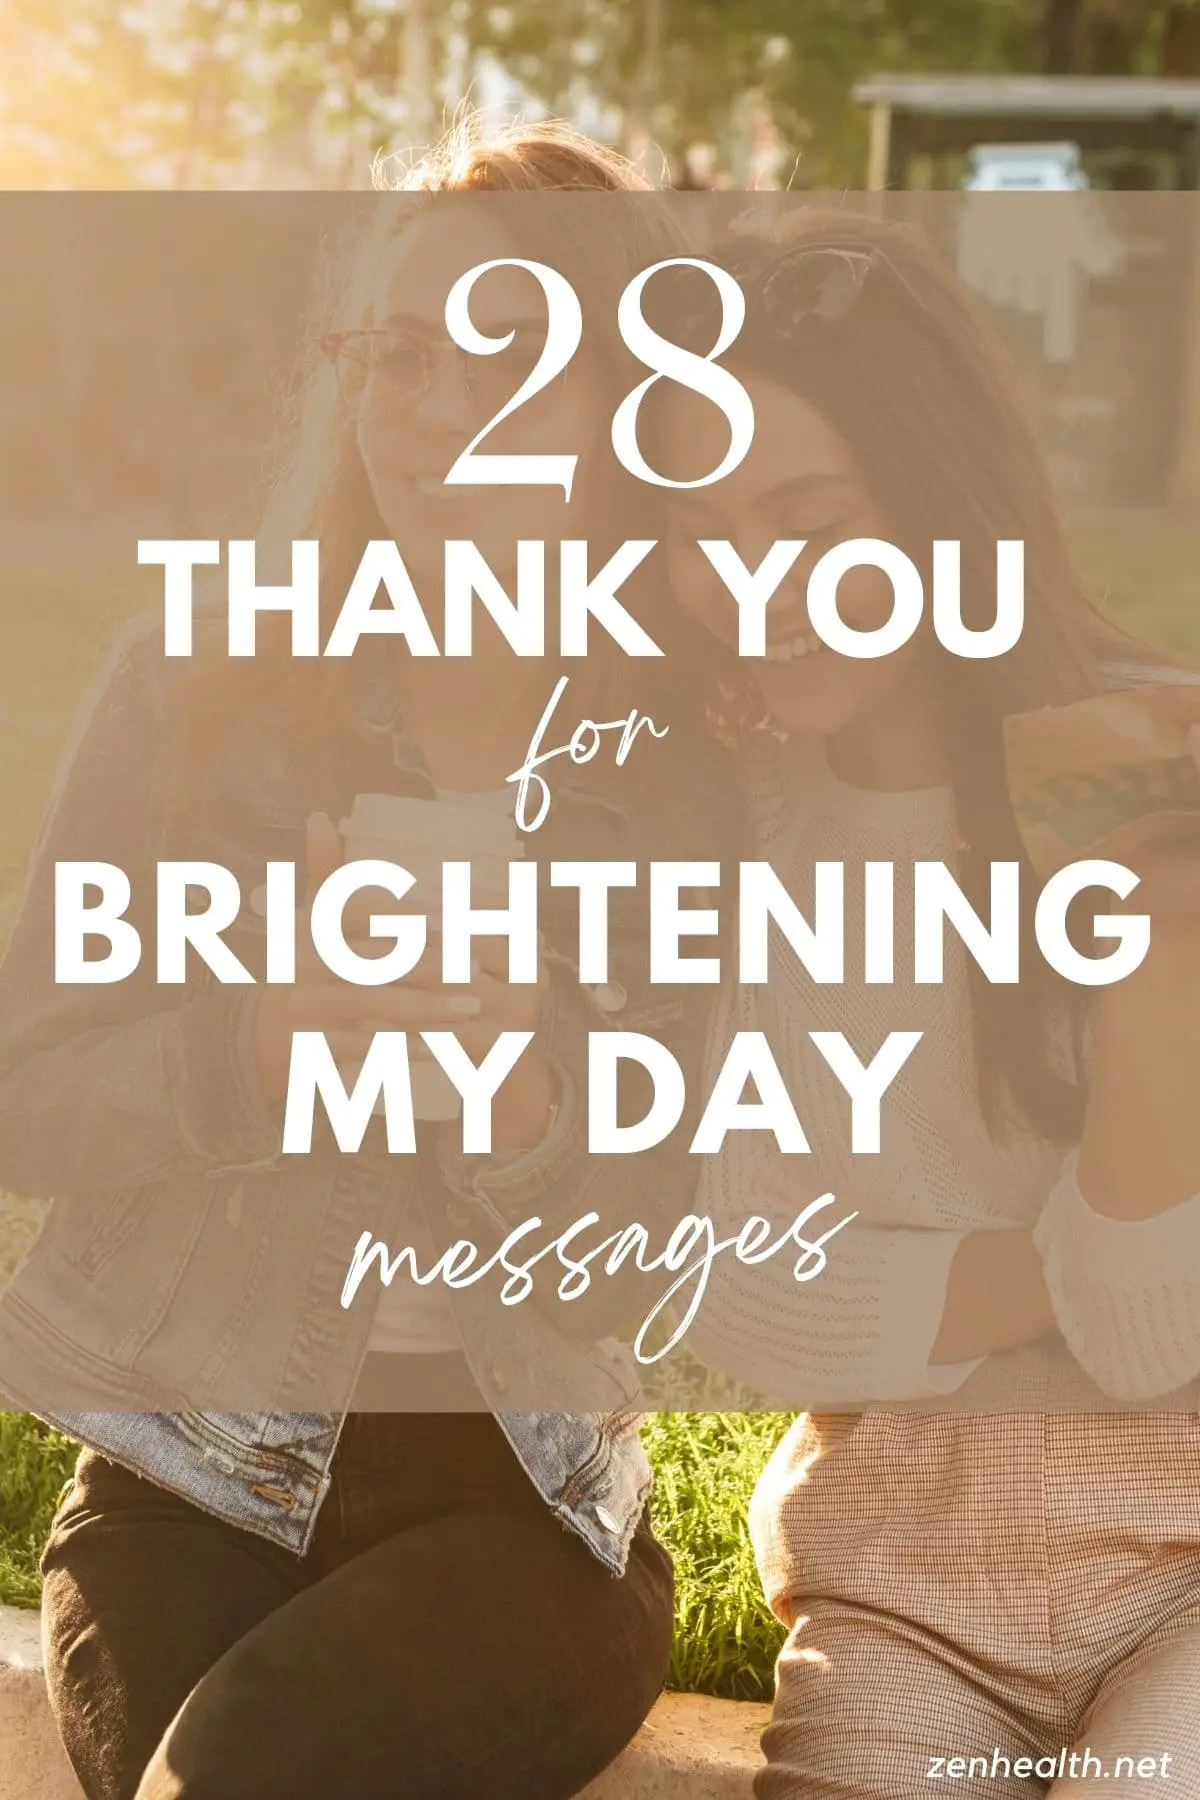 28 thank you for brightening my day messages text overlay over a photo of two women sitting and smiling with food and drink in their hands